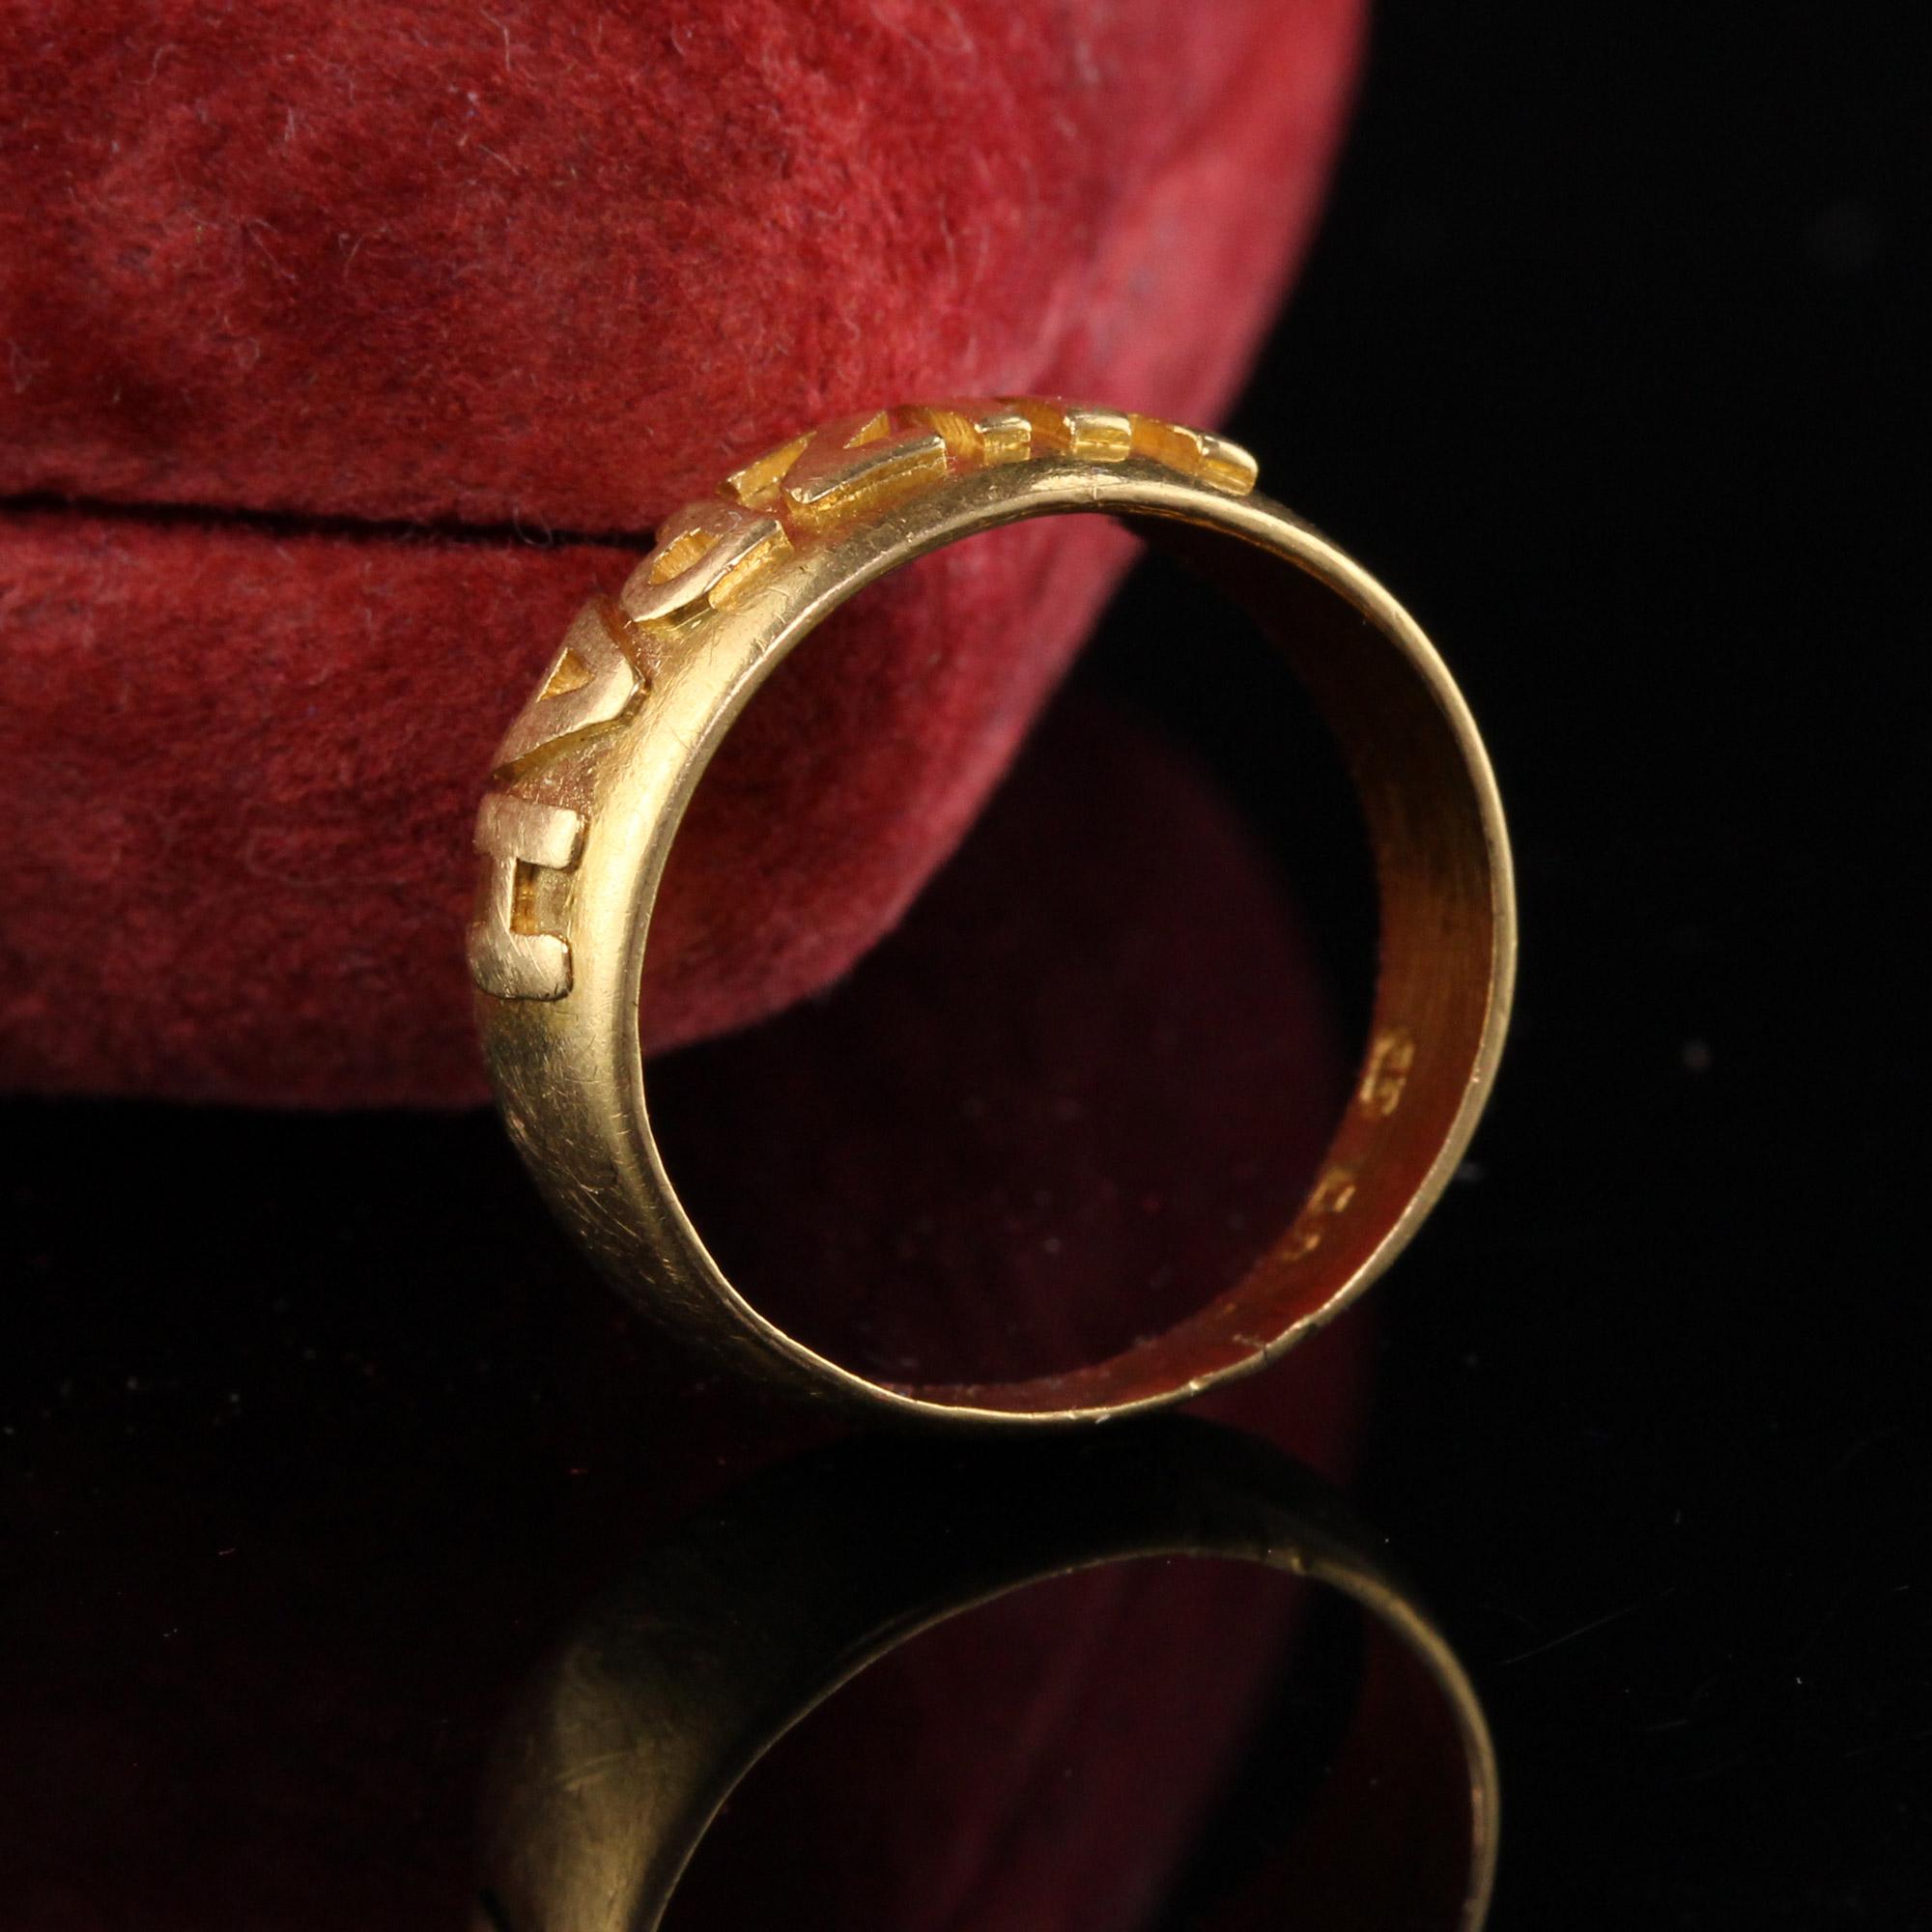 Beautiful Antique Victorian English 18K Yellow Gold Mizpah Ring - Circa 1886. This incredible ring is crafted in 18K gold and was made in 1886 as signified by it's hallmarks. The inside of the ring is also engraved 